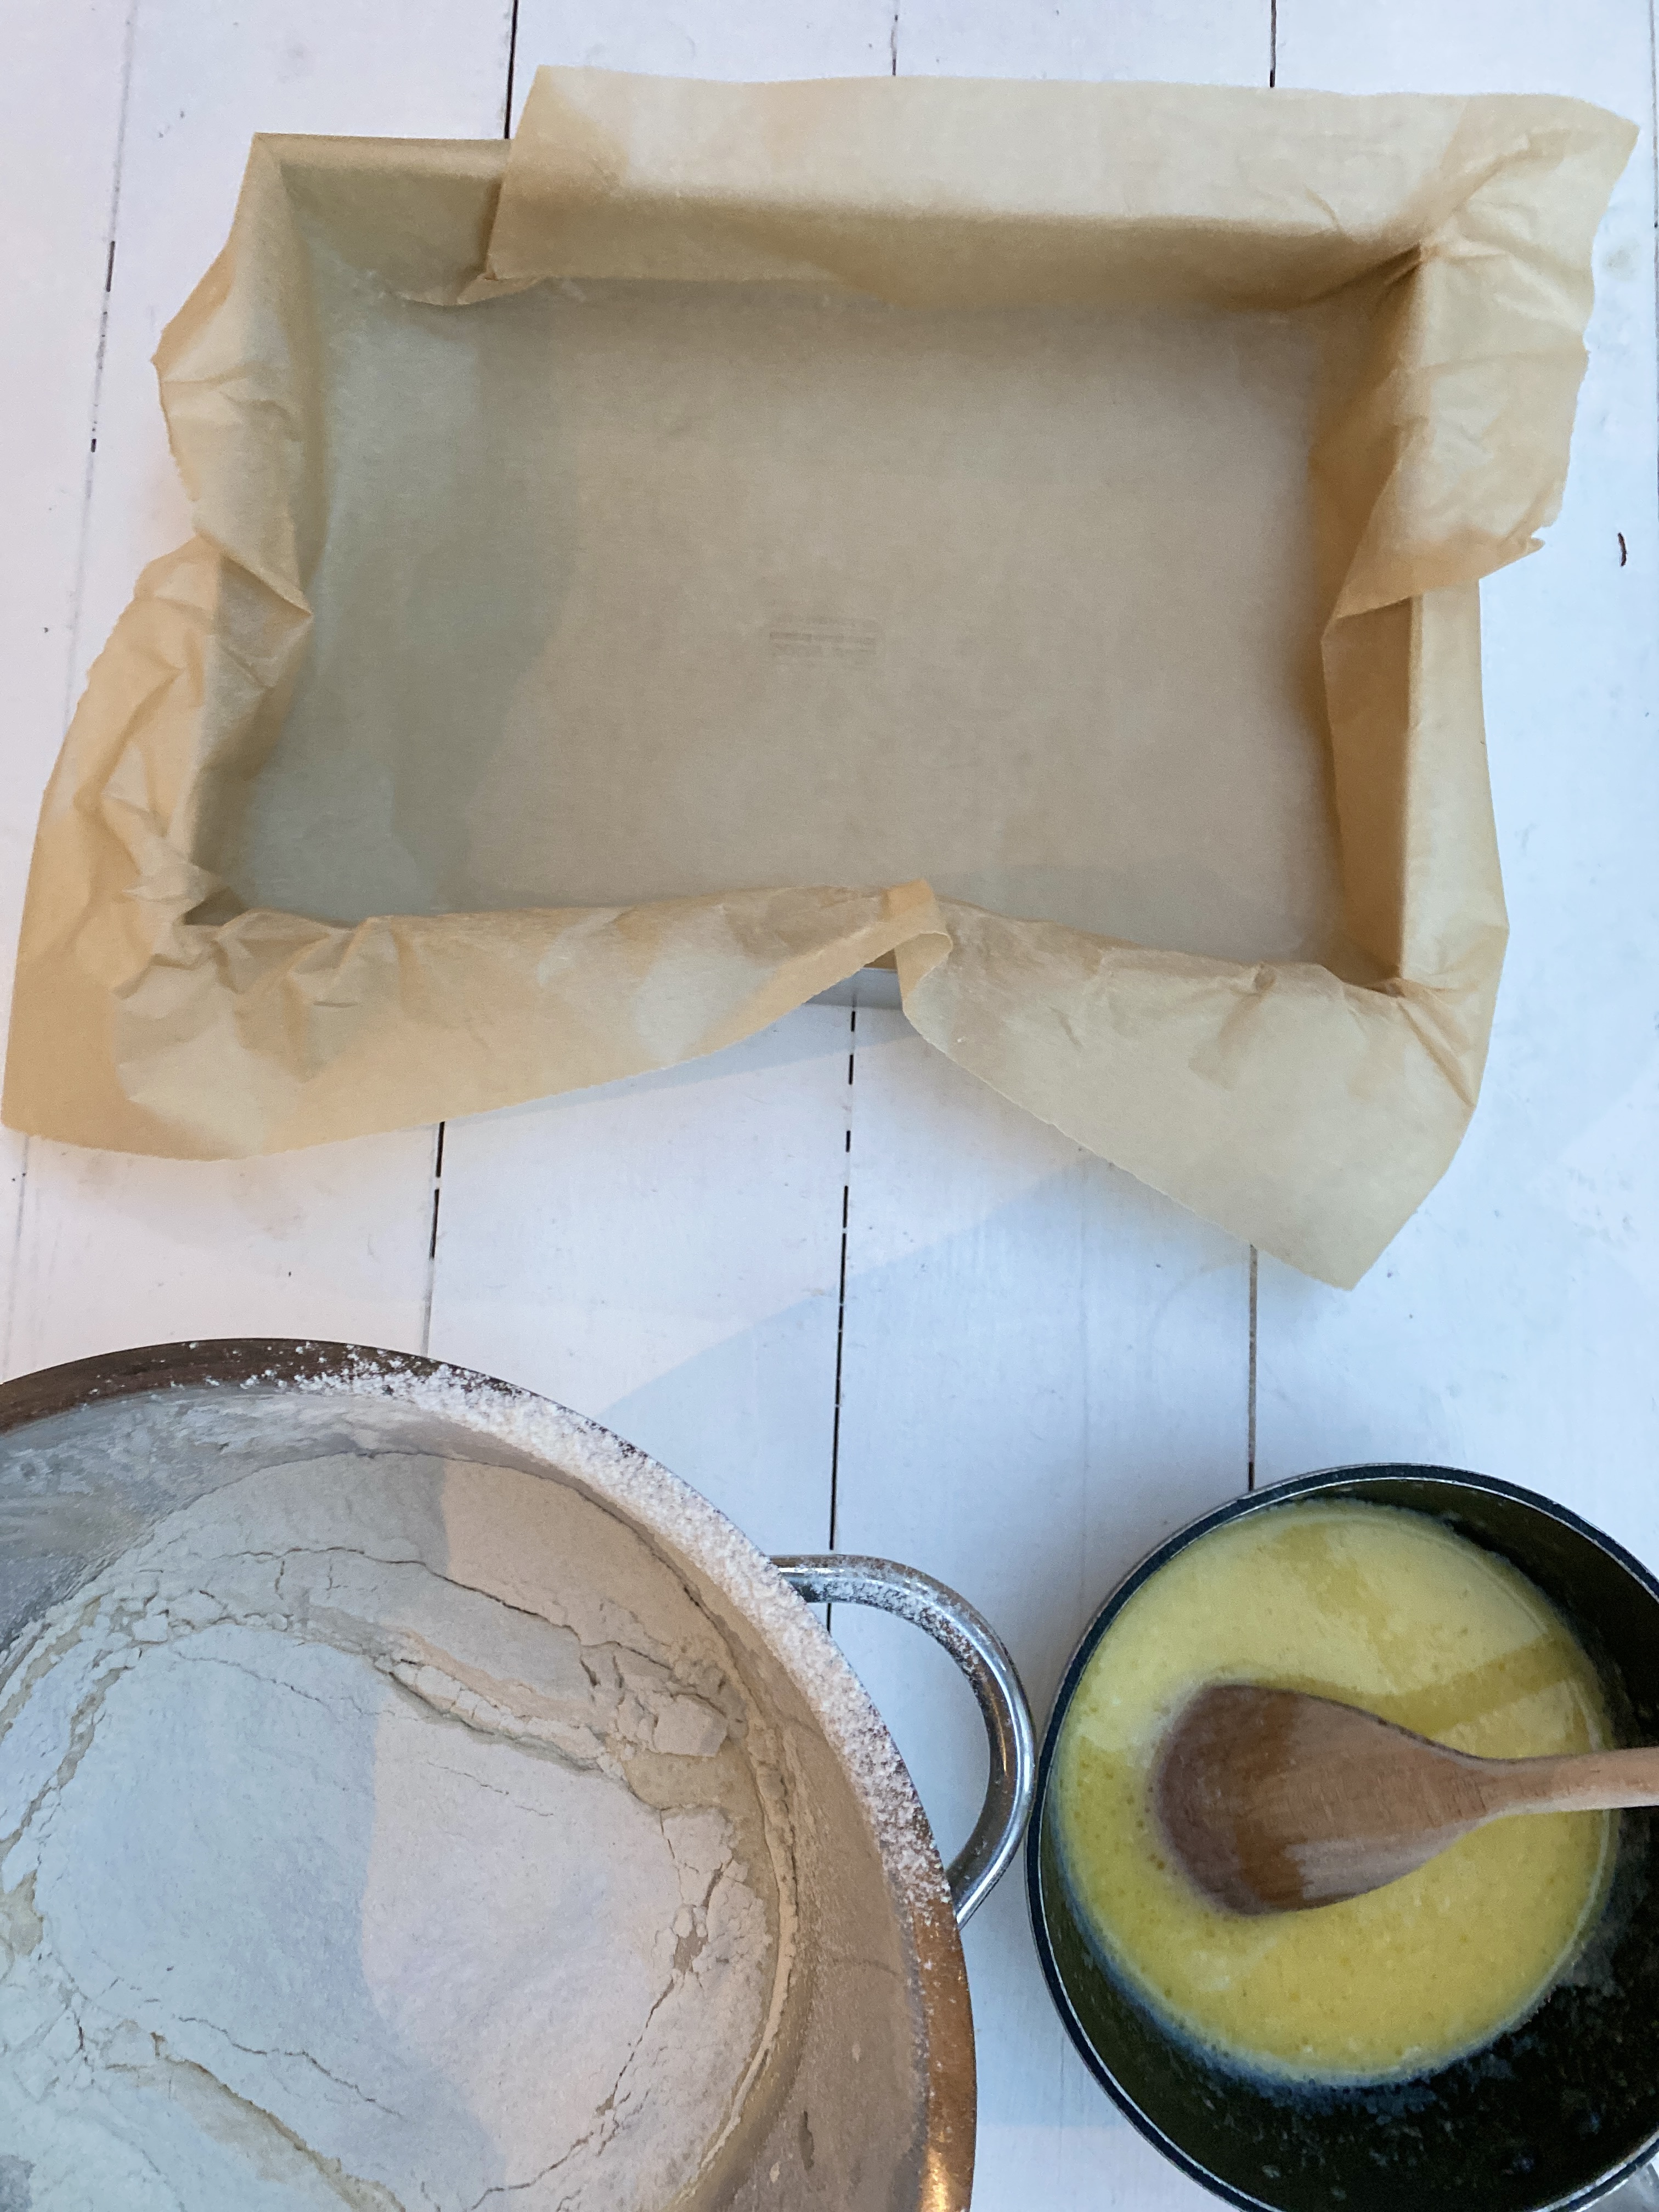 Ingredients for the milk cake and an empty parchment lined baking tray